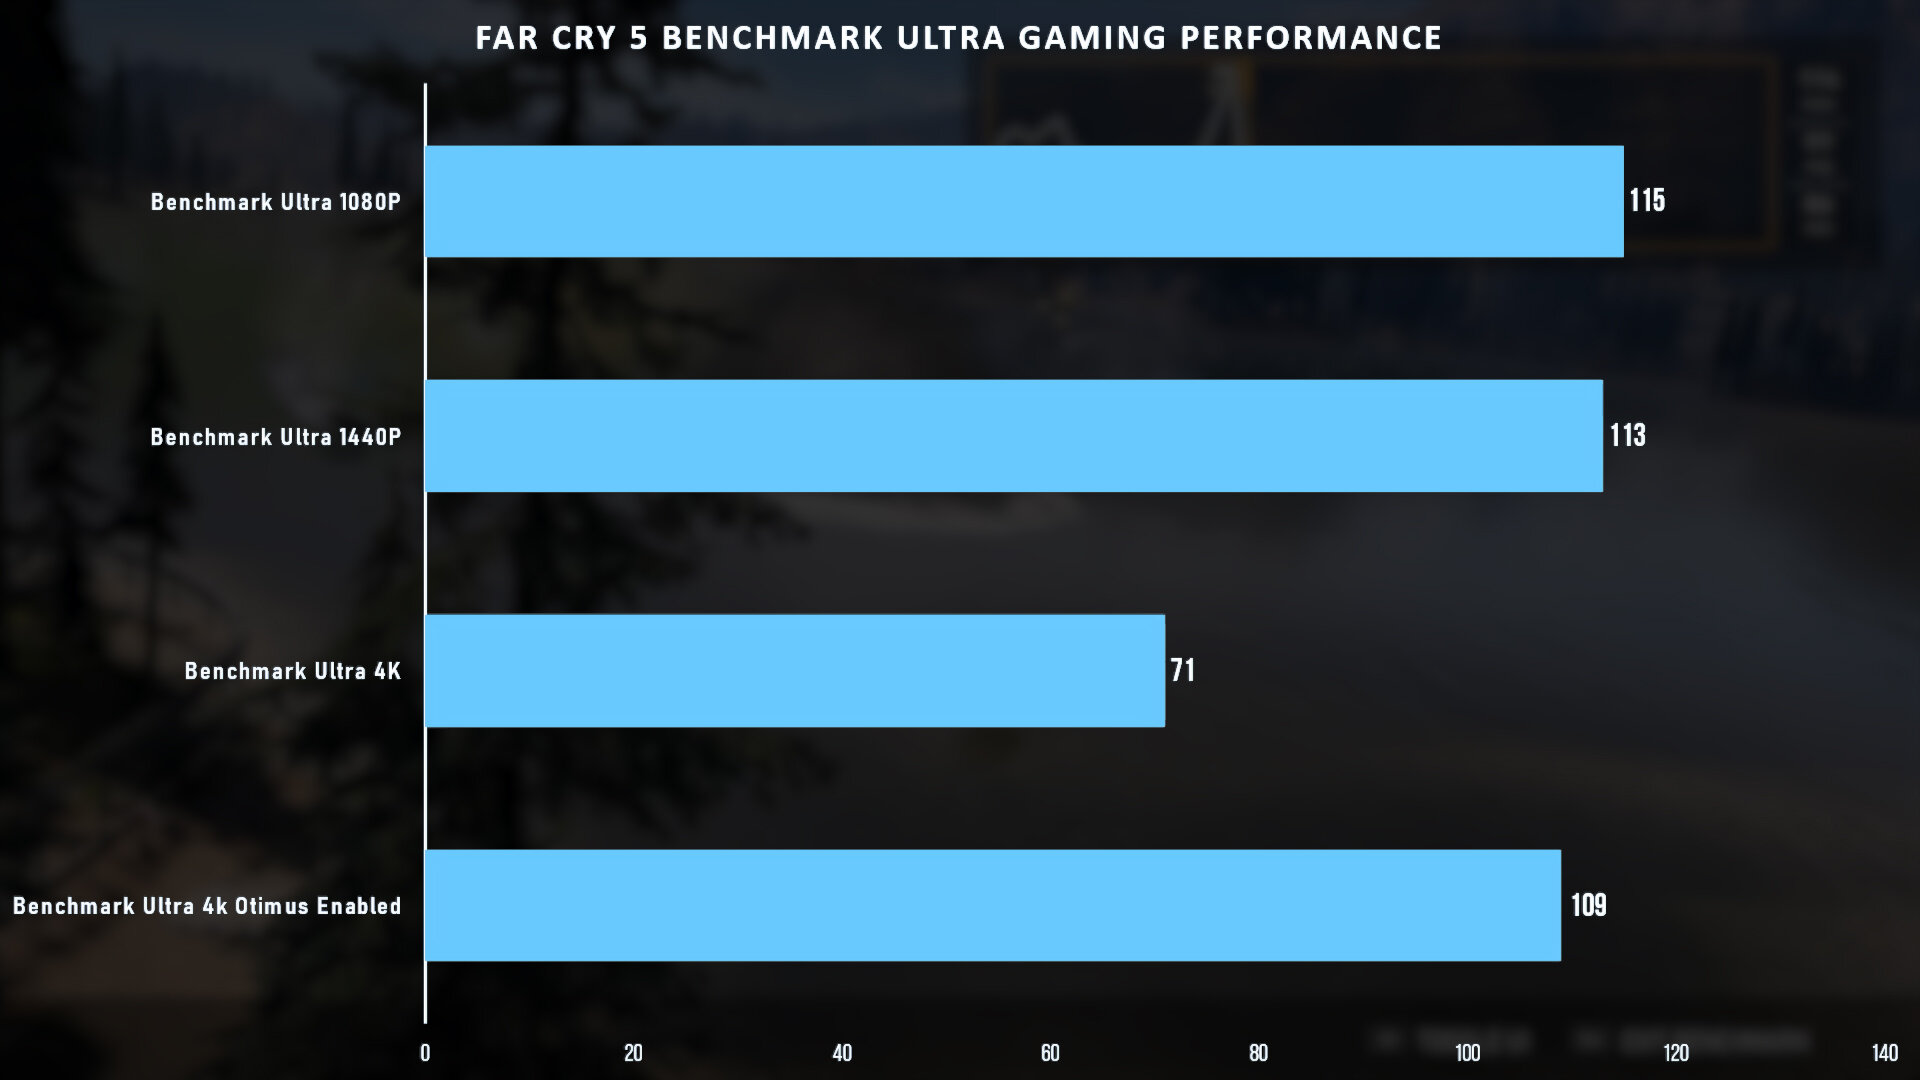 far cry 5 benchmark gaming performance different resolutions.jpg